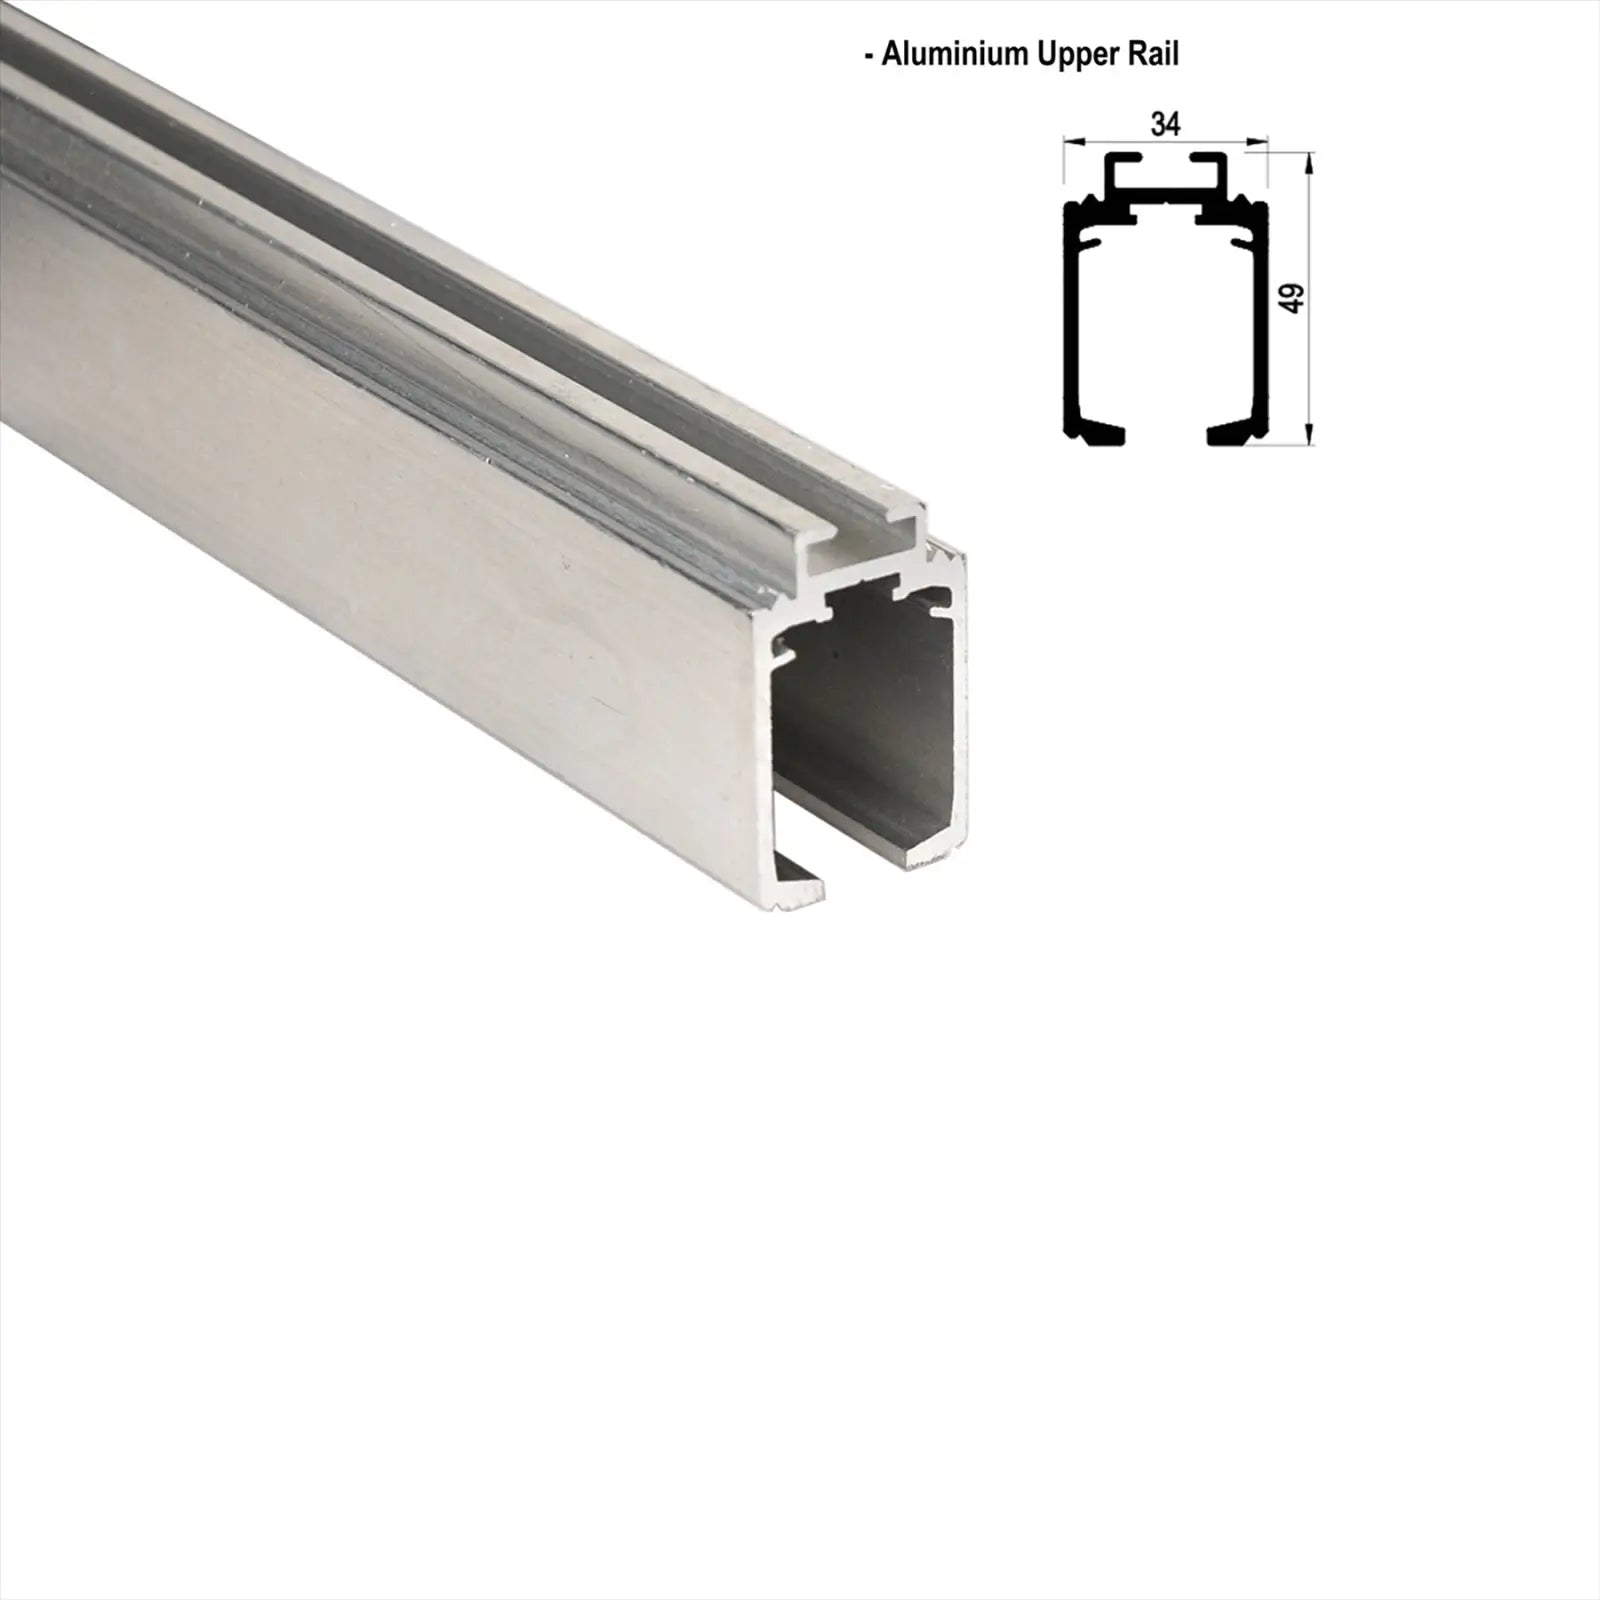 GS-Slide Top Hung Glass Sliding Door Kit - 1800mm Track - One Way Soft Close - Decor And Decor